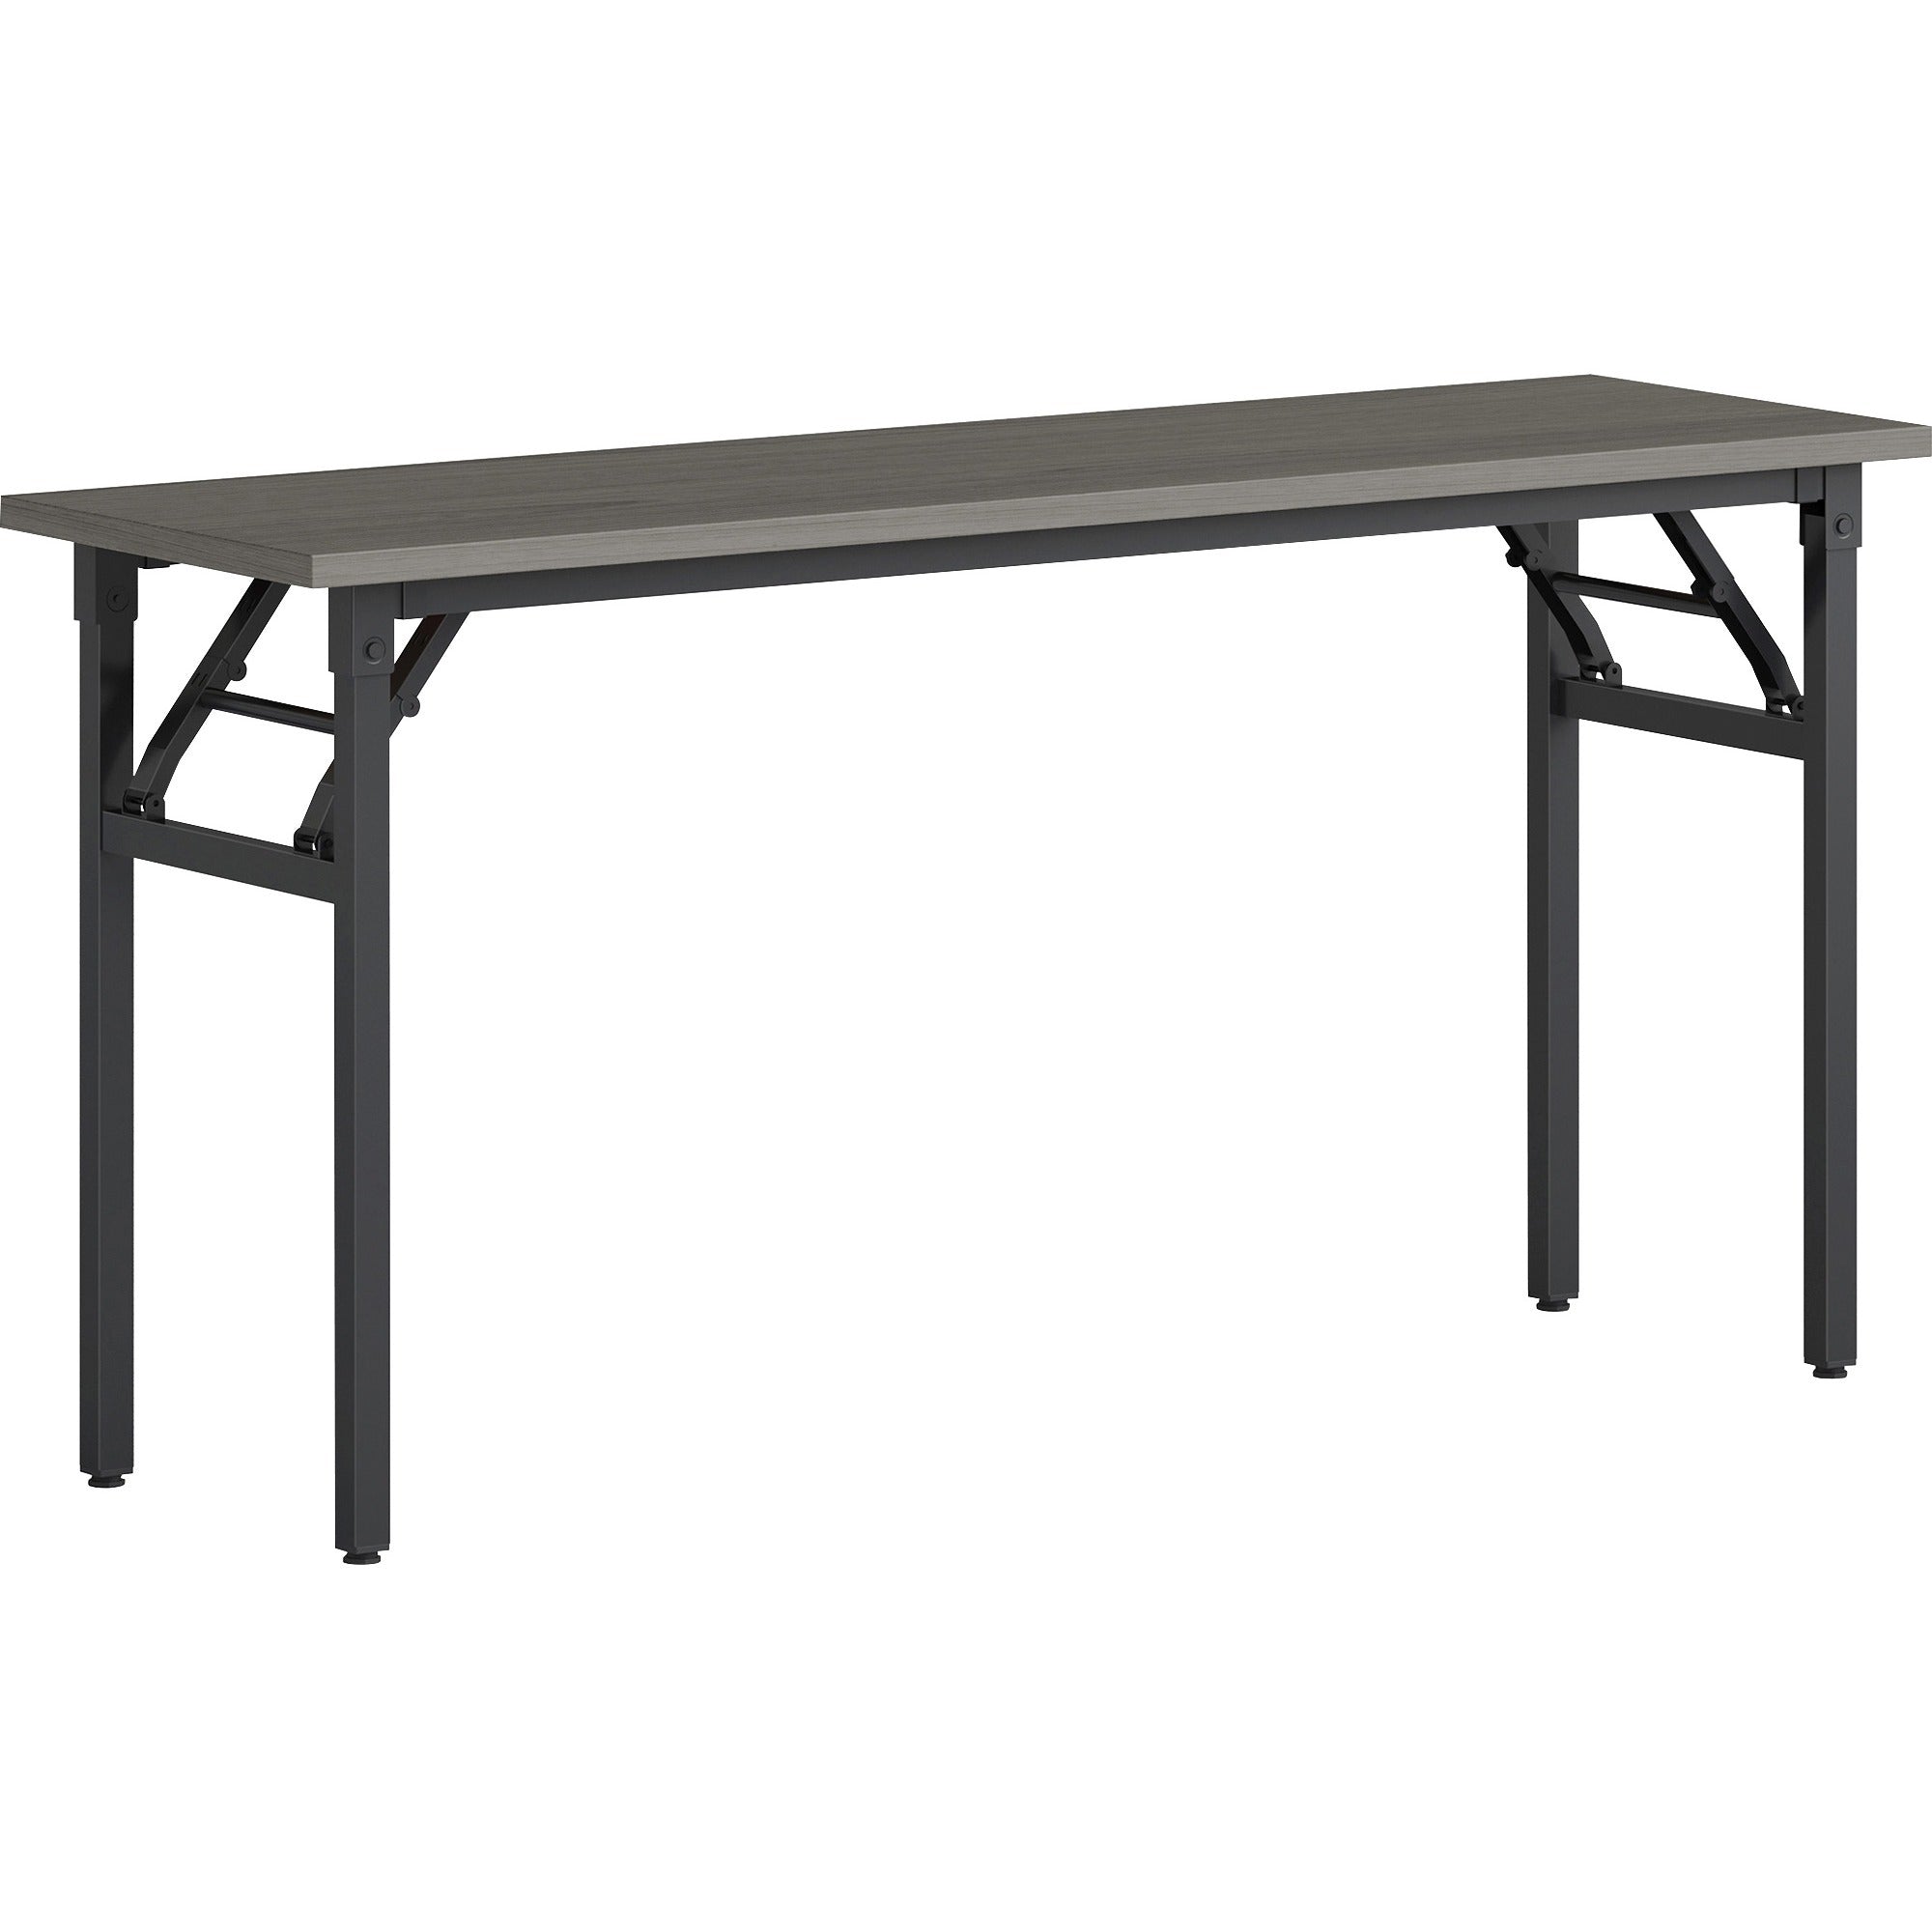 lorell-folding-training-table-for-table-topmelamine-top-x-60-table-top-width-x-18-table-top-depth-x-1-table-top-thickness-30-height-assembly-required-gray-1-each_llr60746 - 1